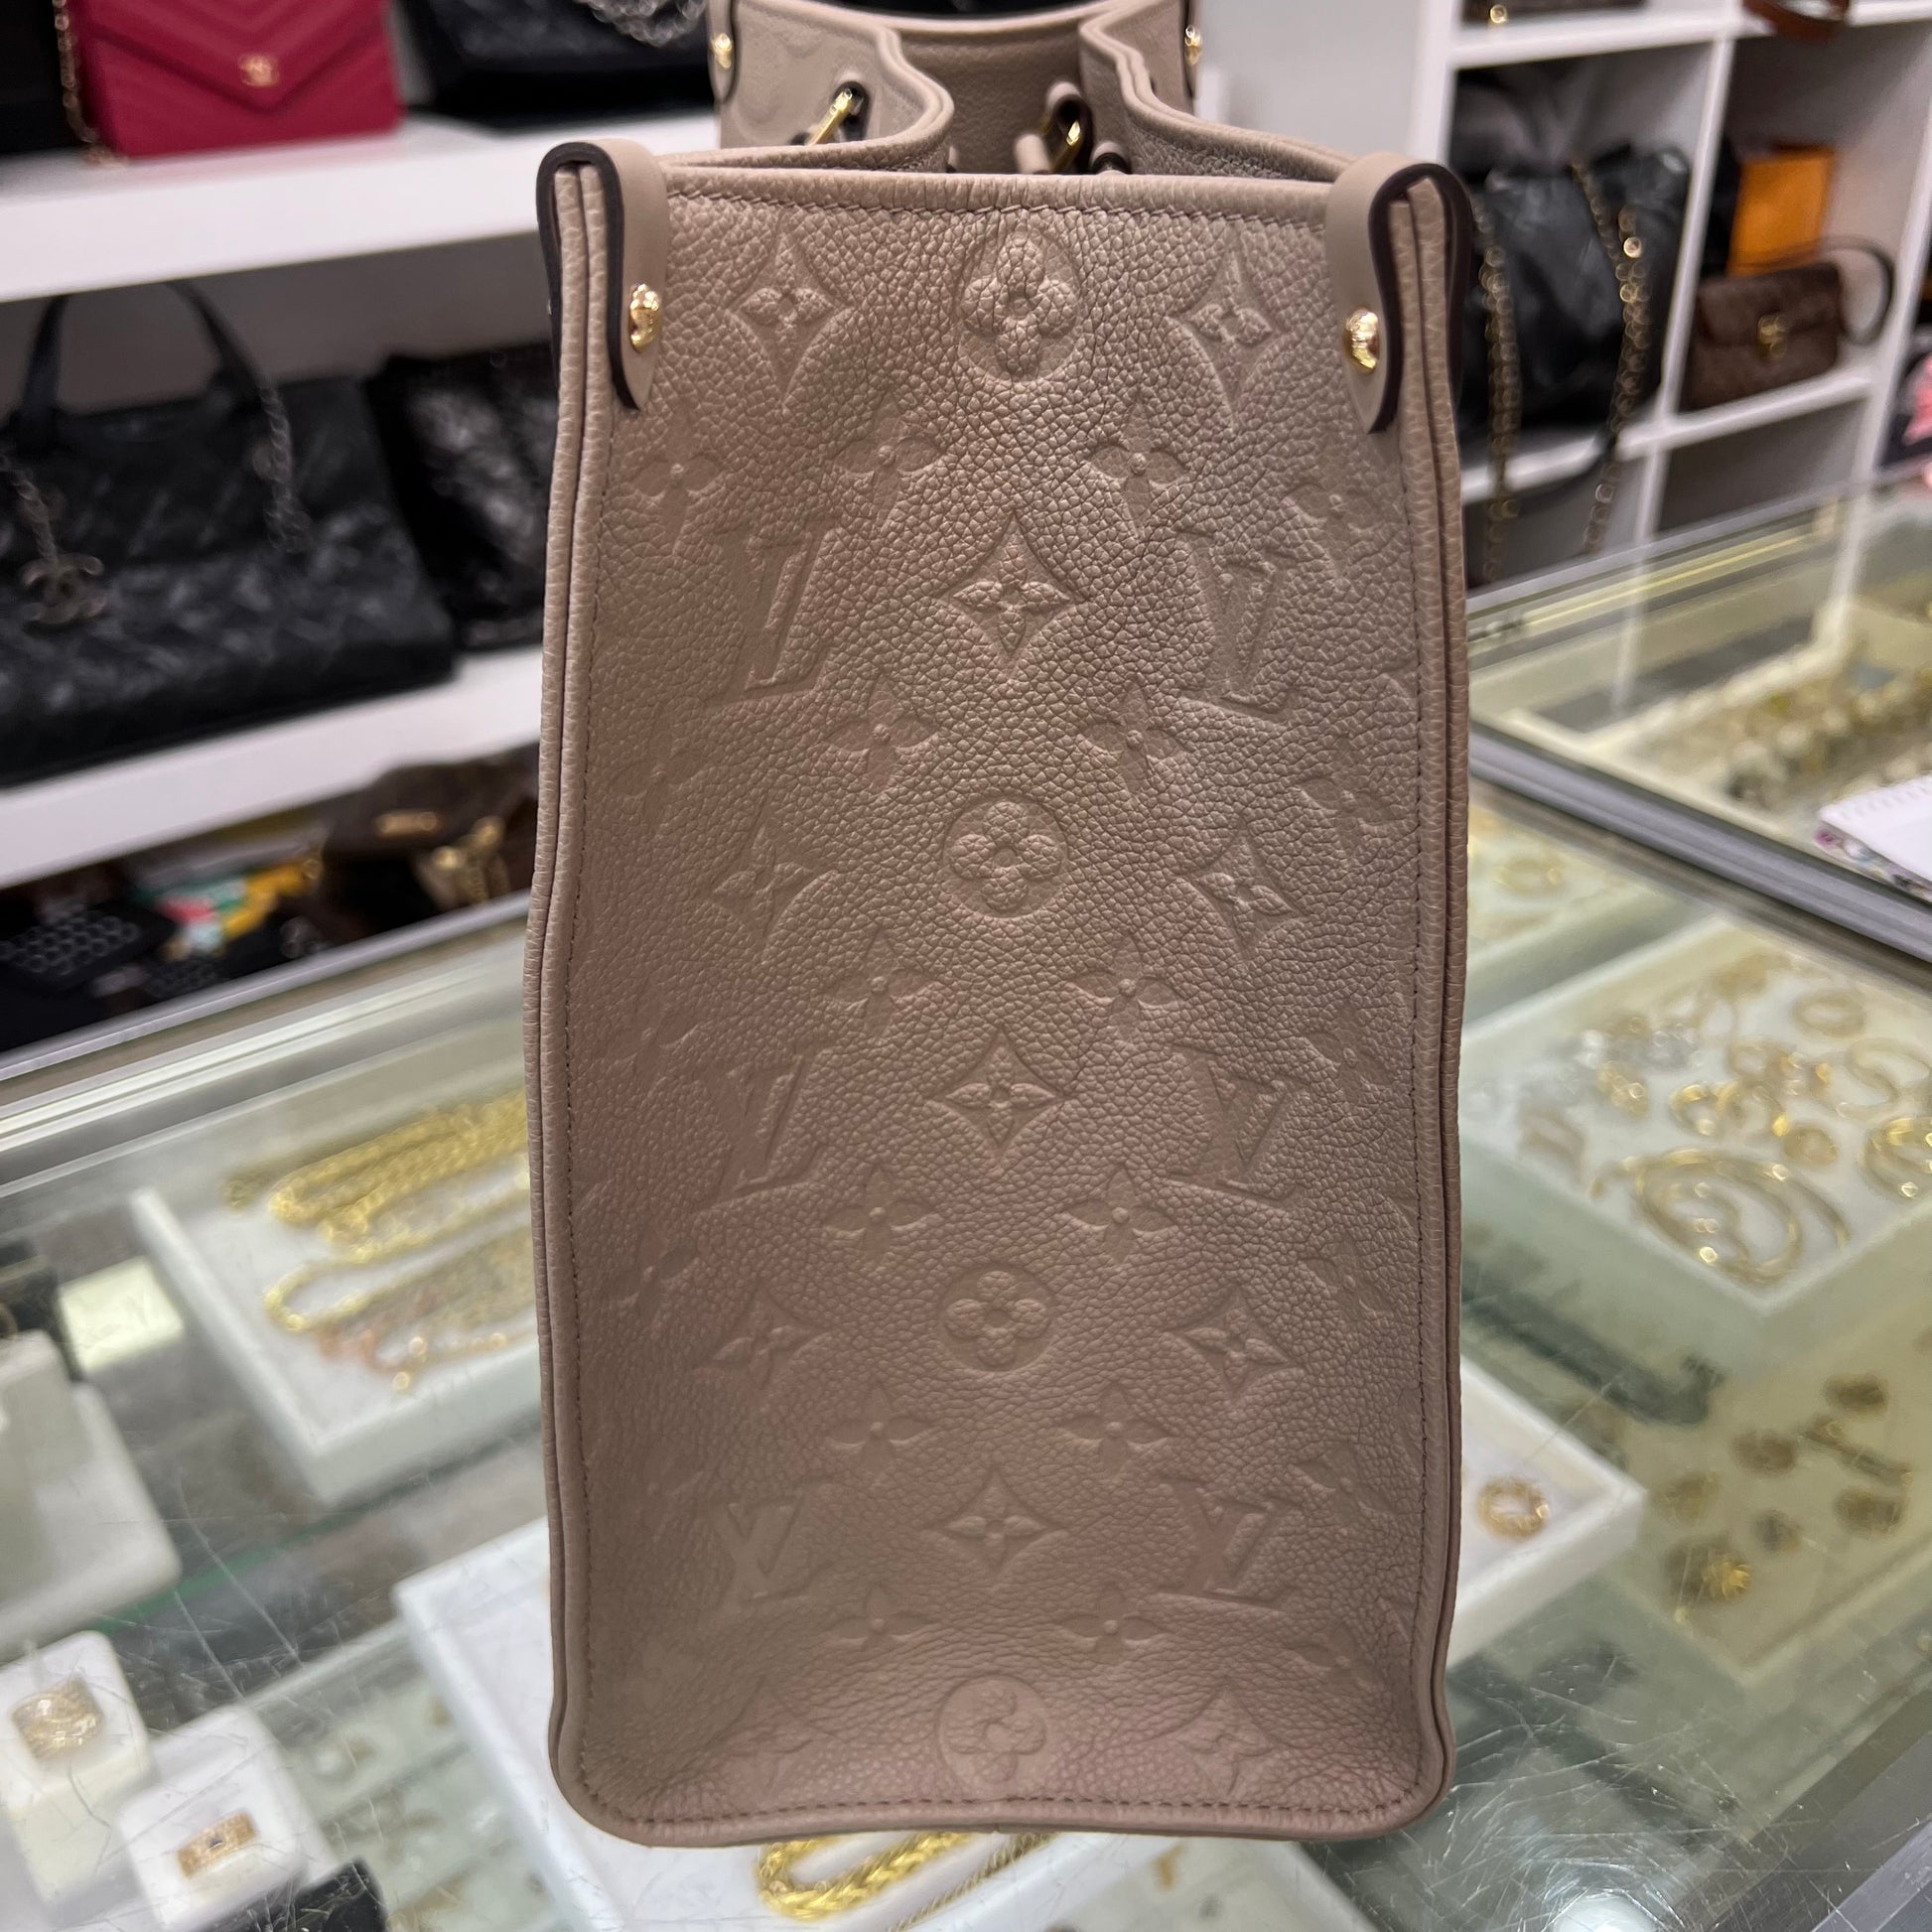 Pochette Métis in Empriente Turtle Dove. Shipped from Ontario, CA.  Beautiful in person, Embossing is not that prominent in person. Hardware  had little scratches - not happy with it. I think someone